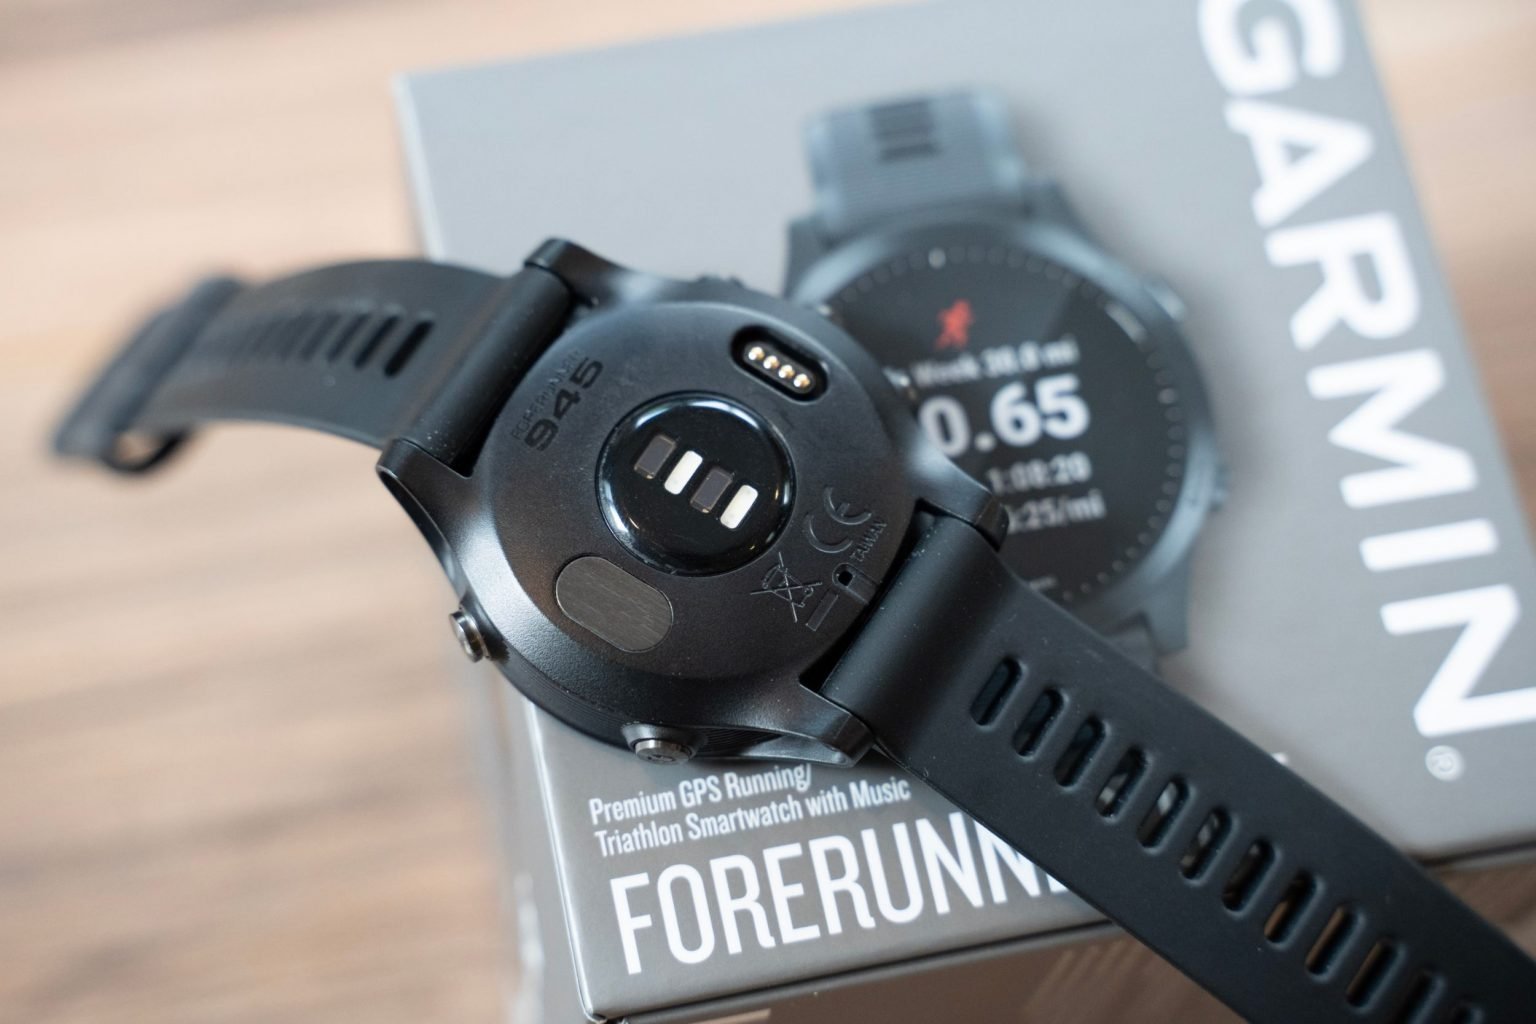 Garmin Forerunner Review - The New GPS Fitness King? — Chase the